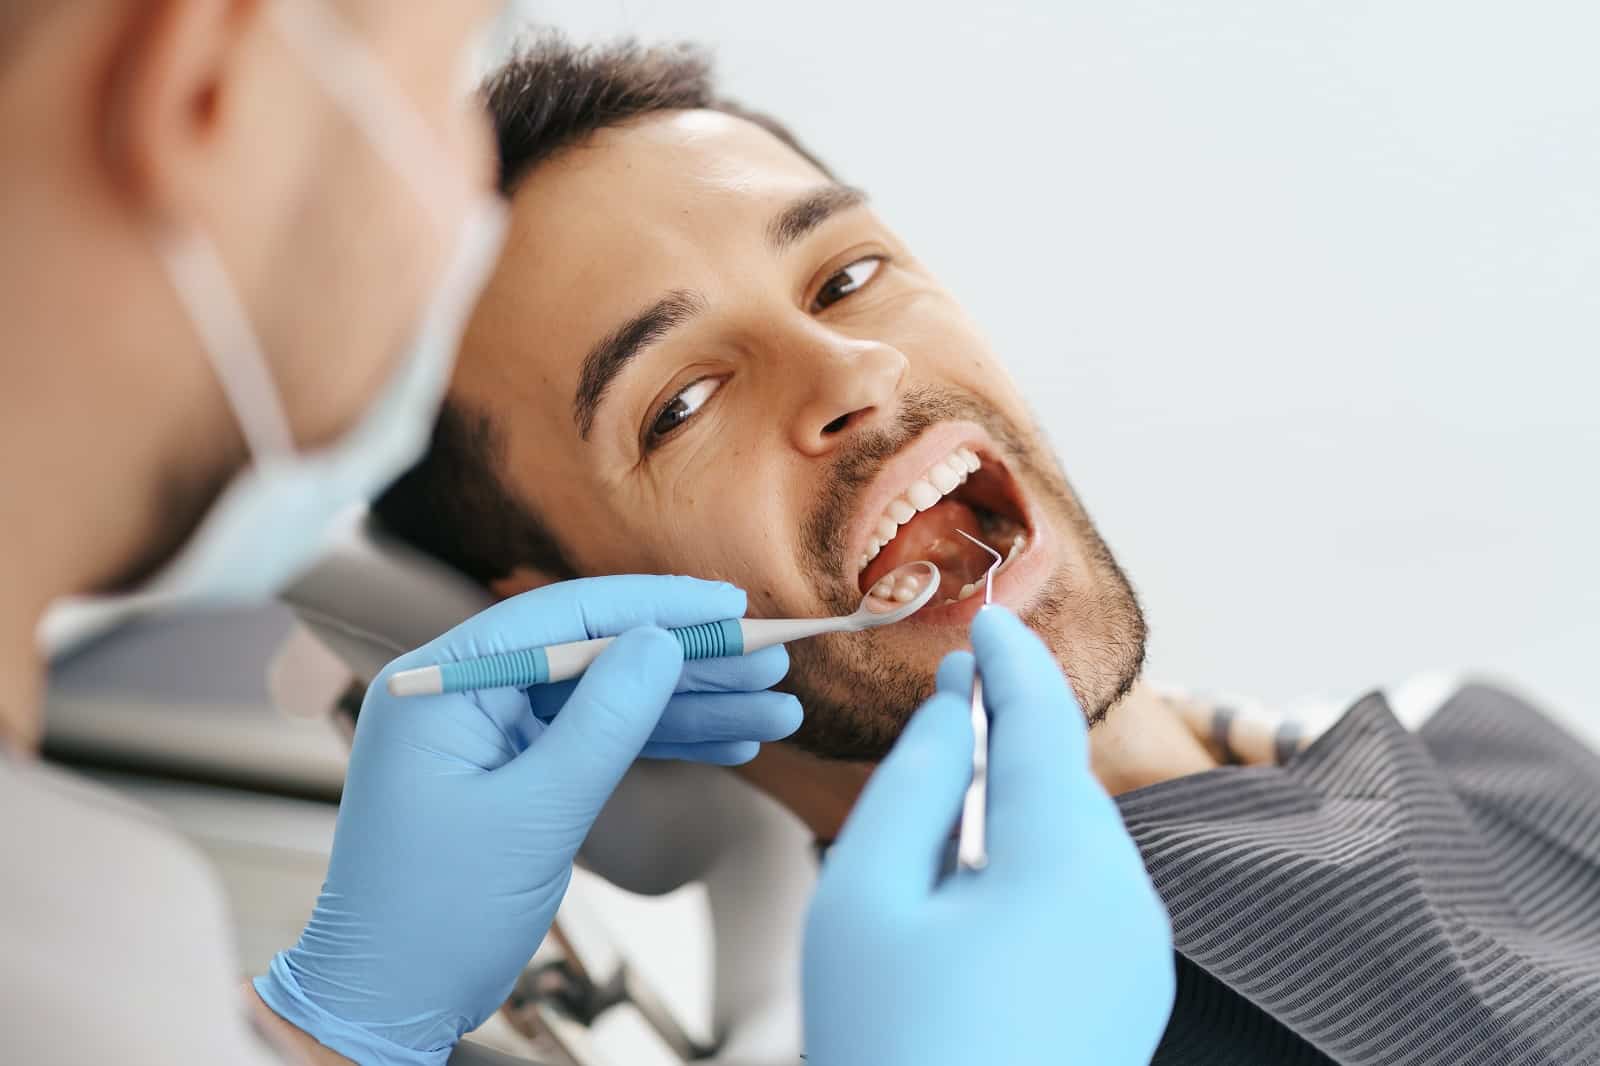 <p><span>Evans points out that factors such as puberty can affect the accuracy of X-ray assessments. At the same time, dental checks may not provide definitive results due to the wide variety of ages at which wisdom teeth can appear.</span></p>